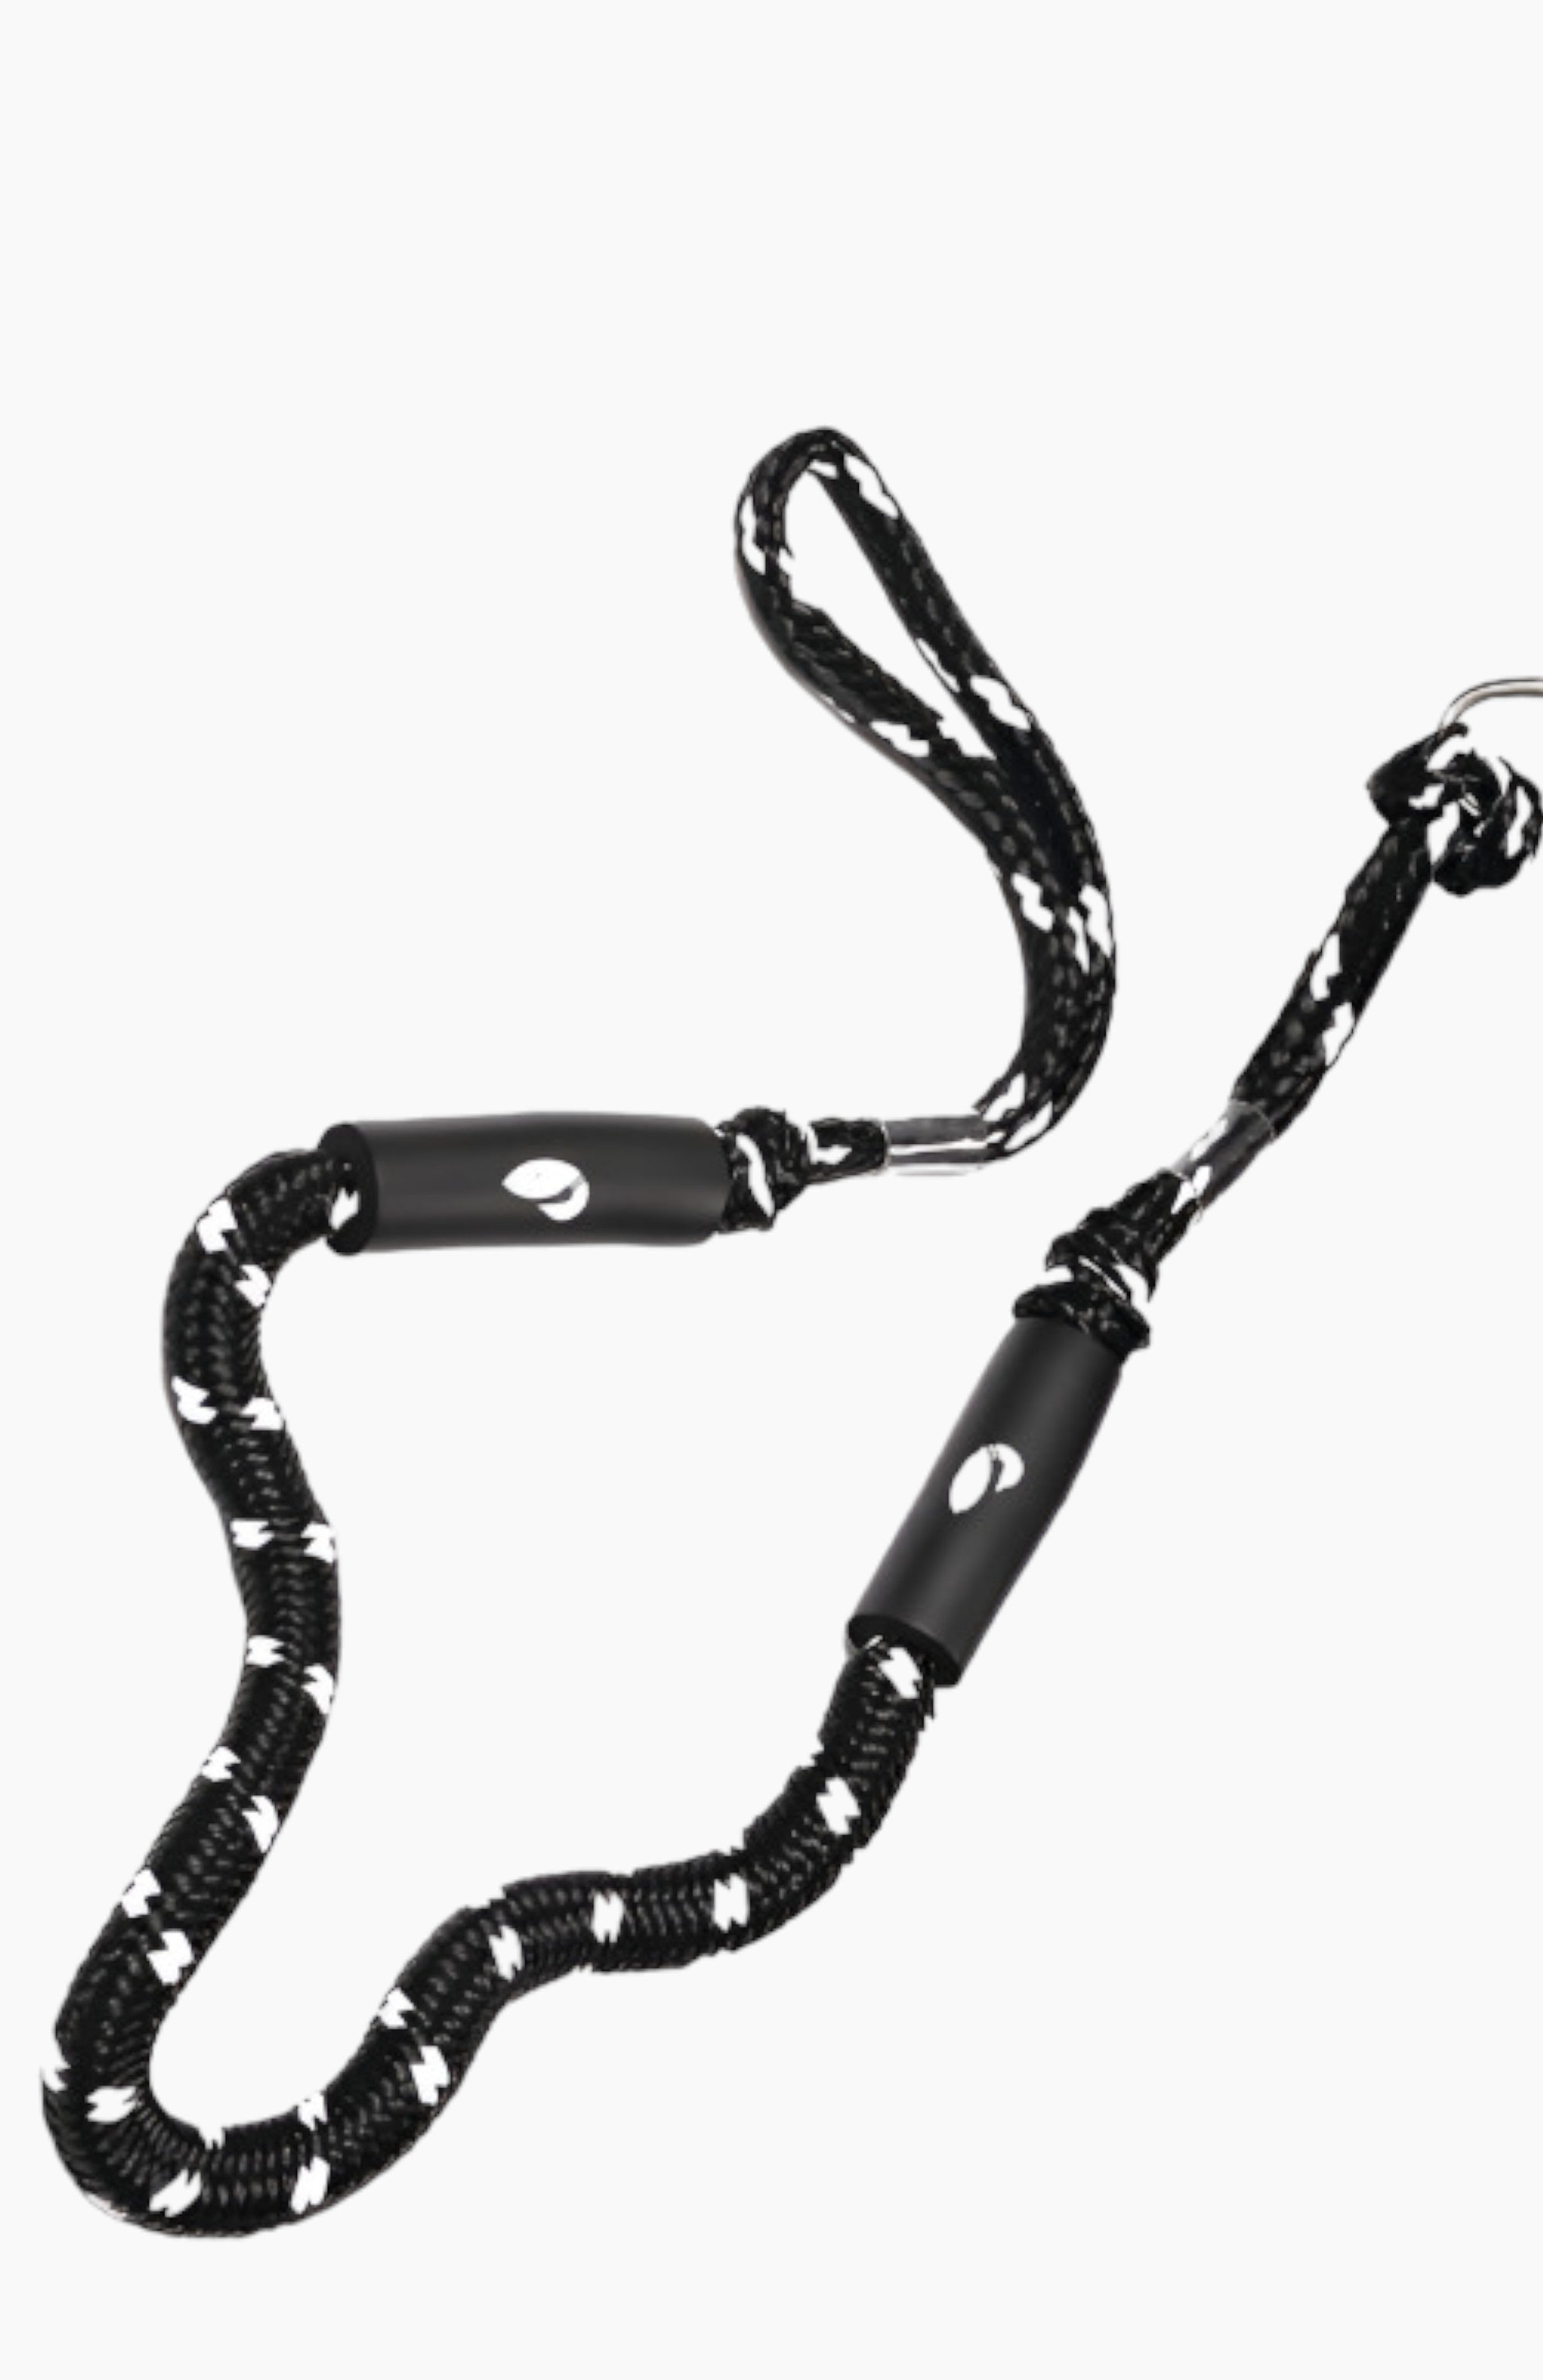 Boat accessories: a black and white woven mooring bungee rope.